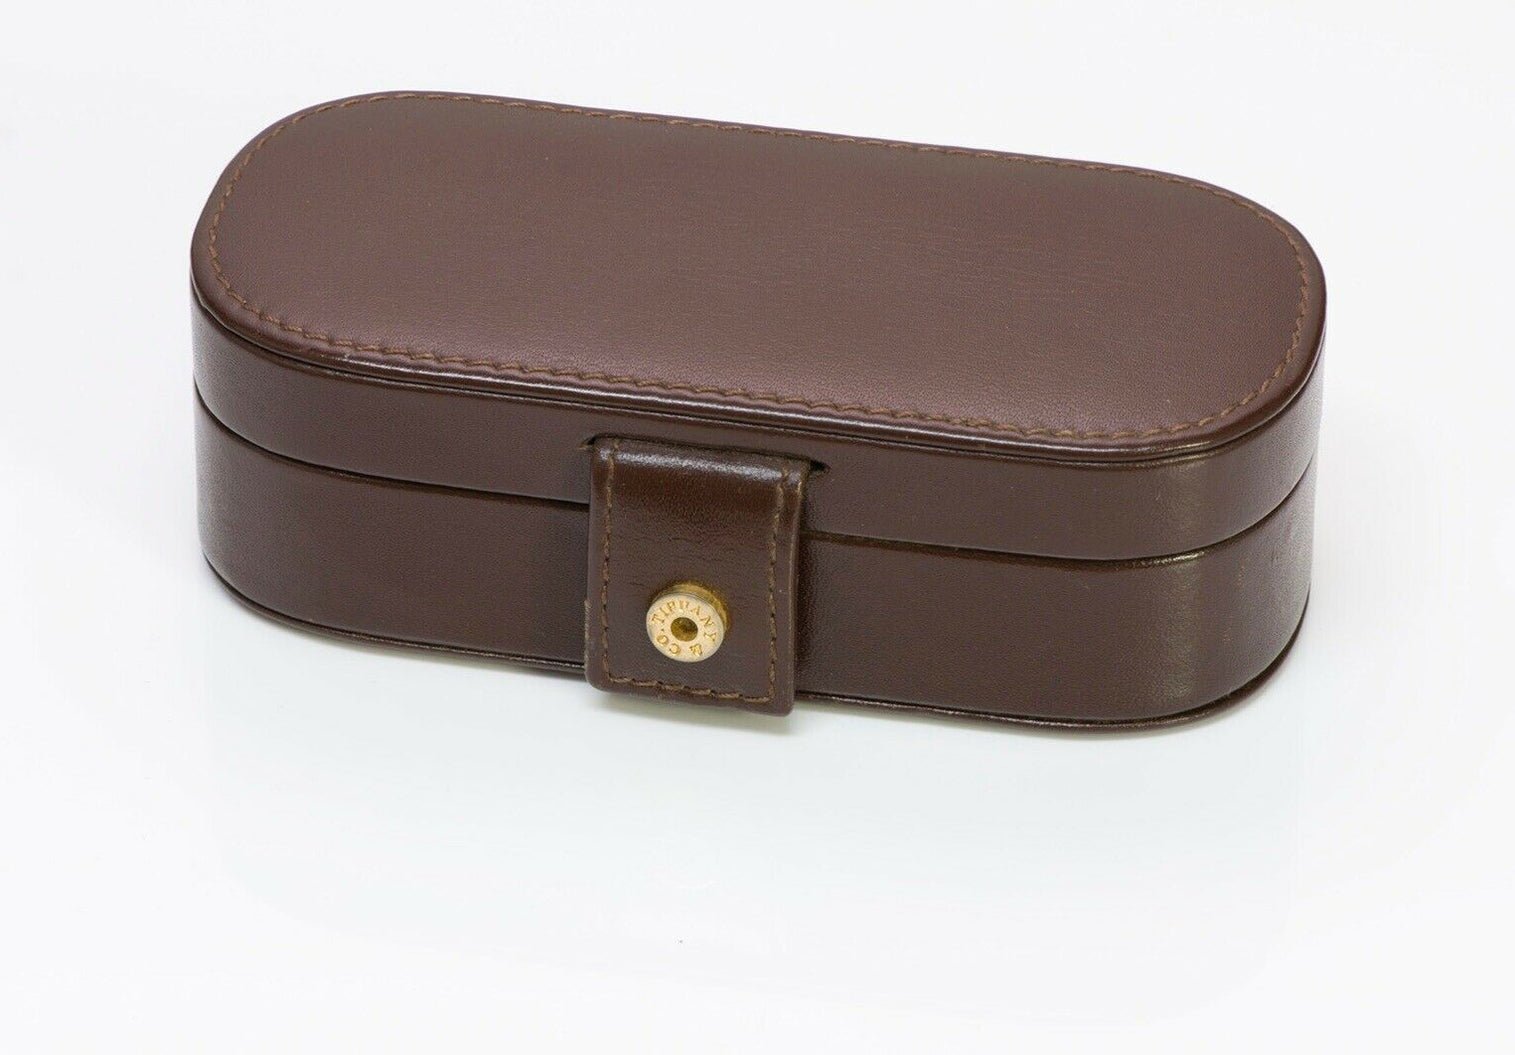 TIFFANY & Co. Brown Leather Jewelry Box Case